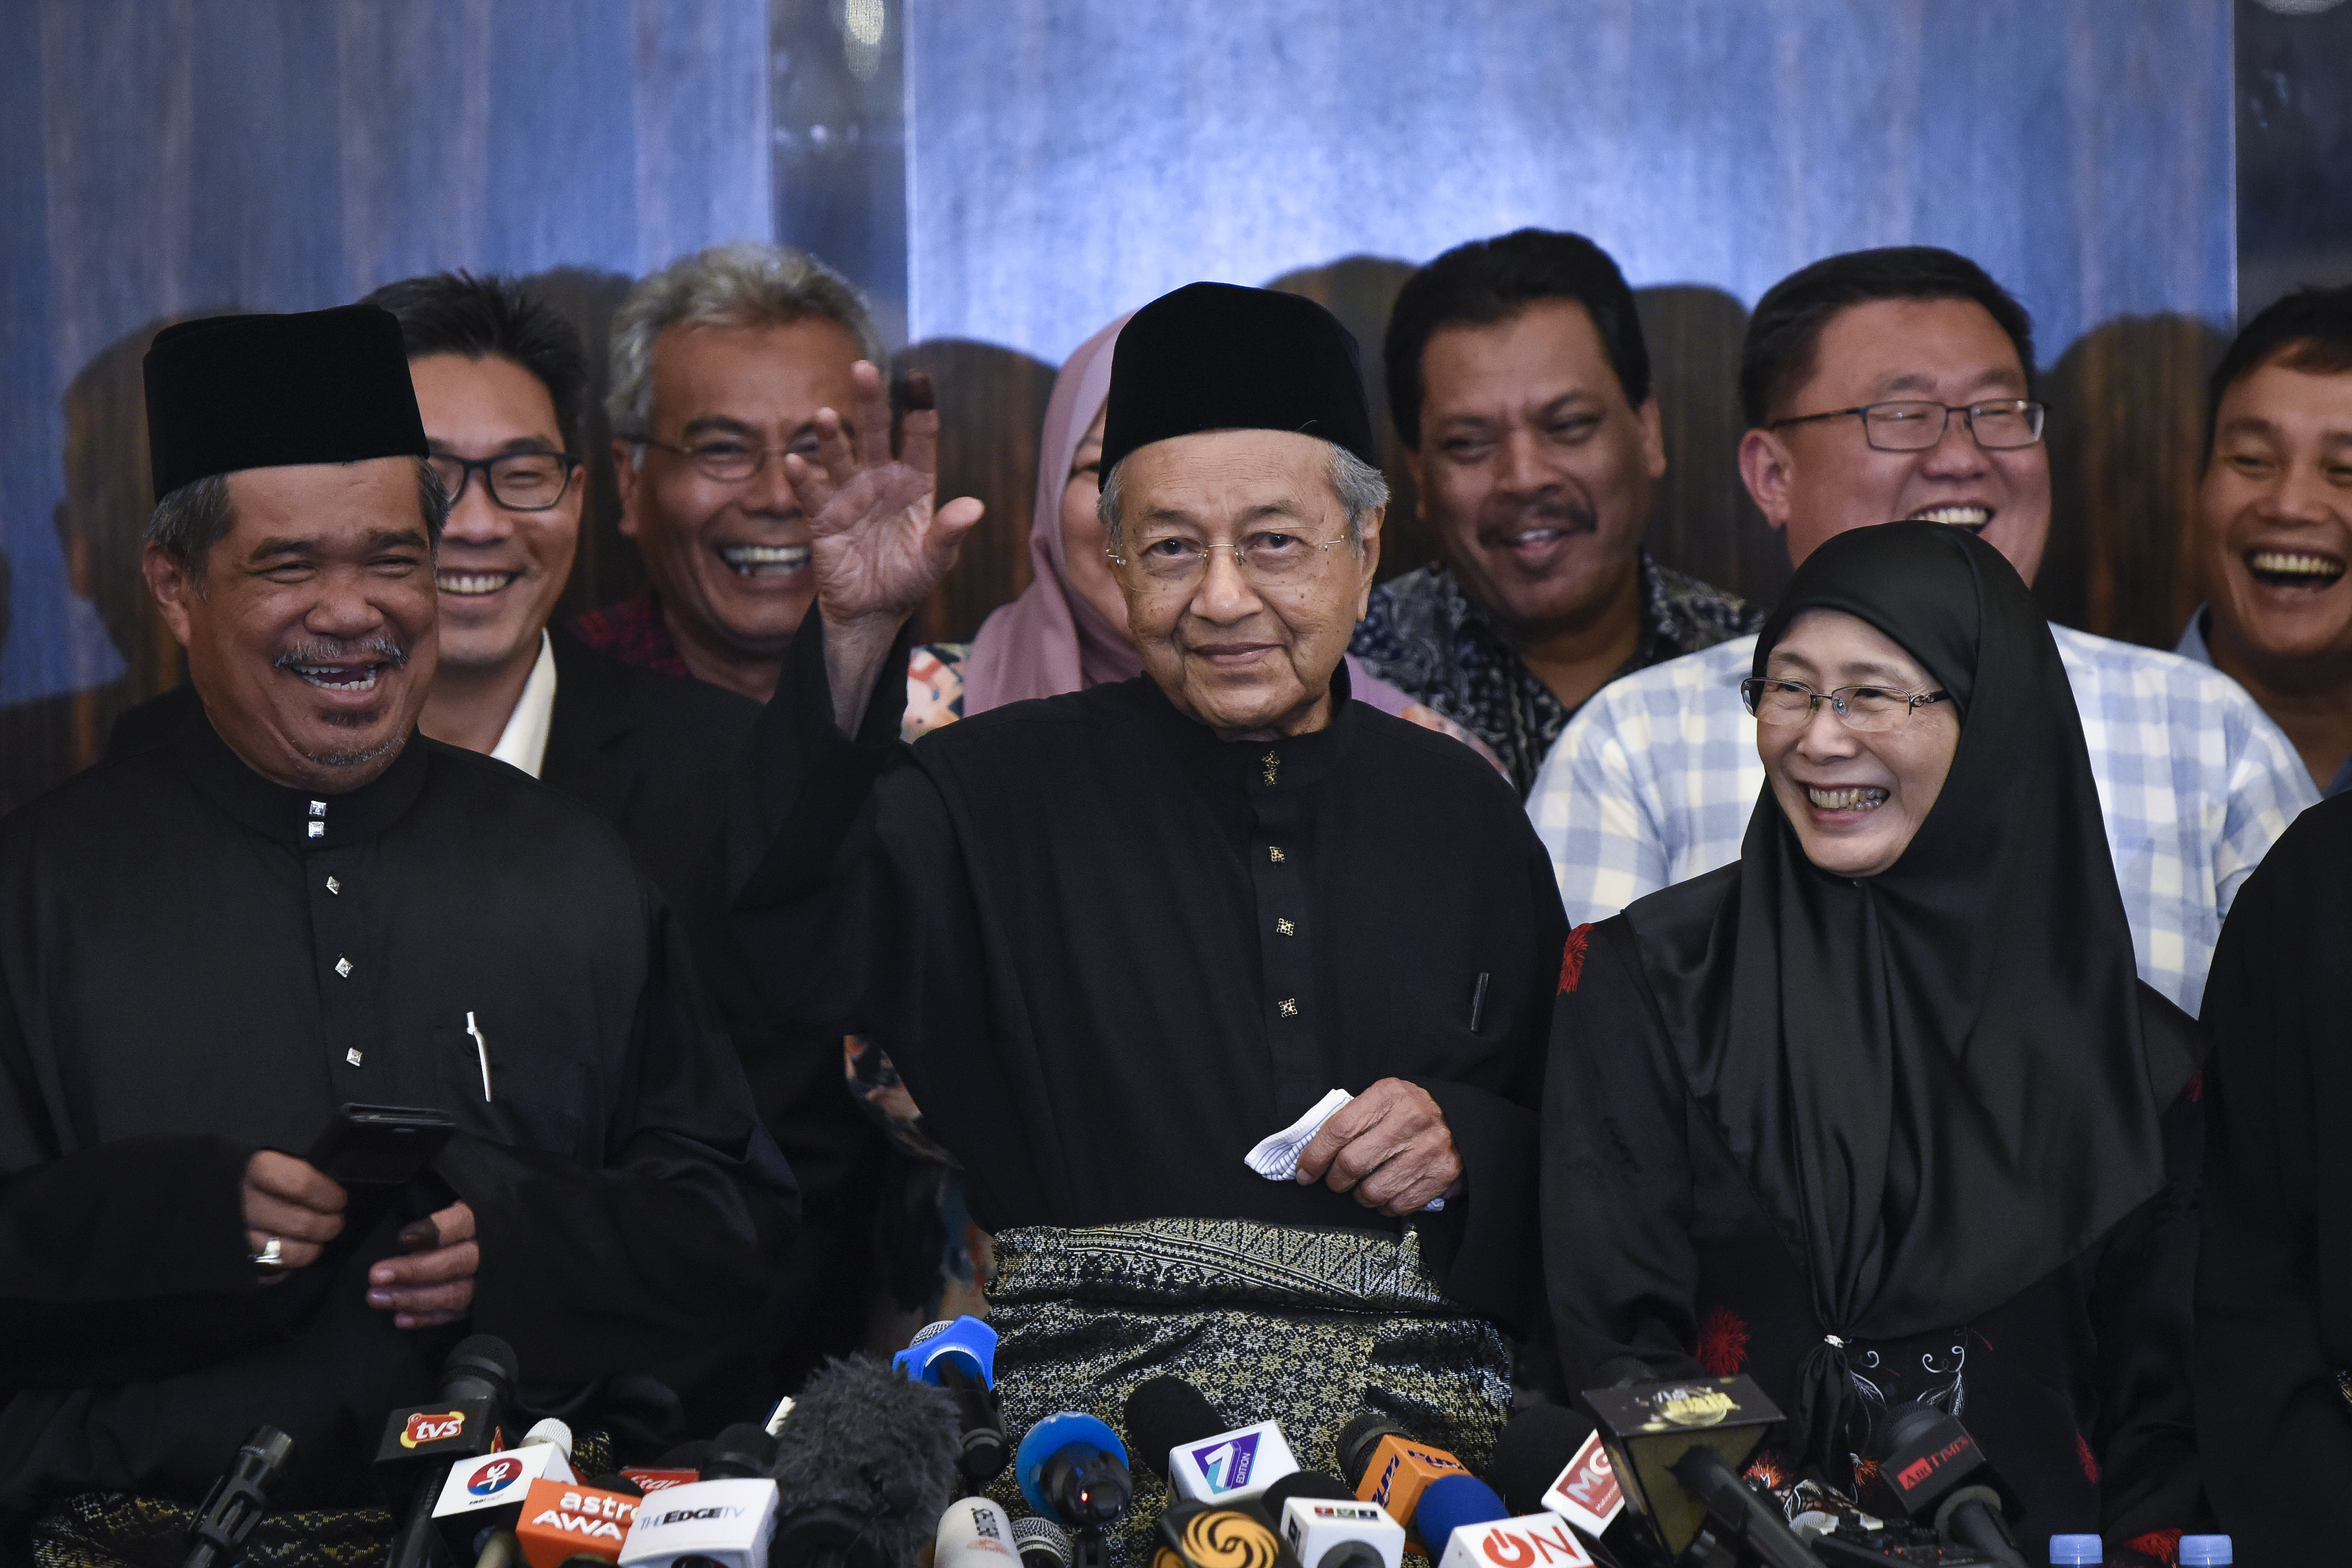 The 7th Malaysian Prime Minister and opposition candidate Mahathir Mohamad during a press conference on May 10, 2018 in Kuala Lumpur, Malaysia. (Chris Jung—NurPhoto/Getty Images)